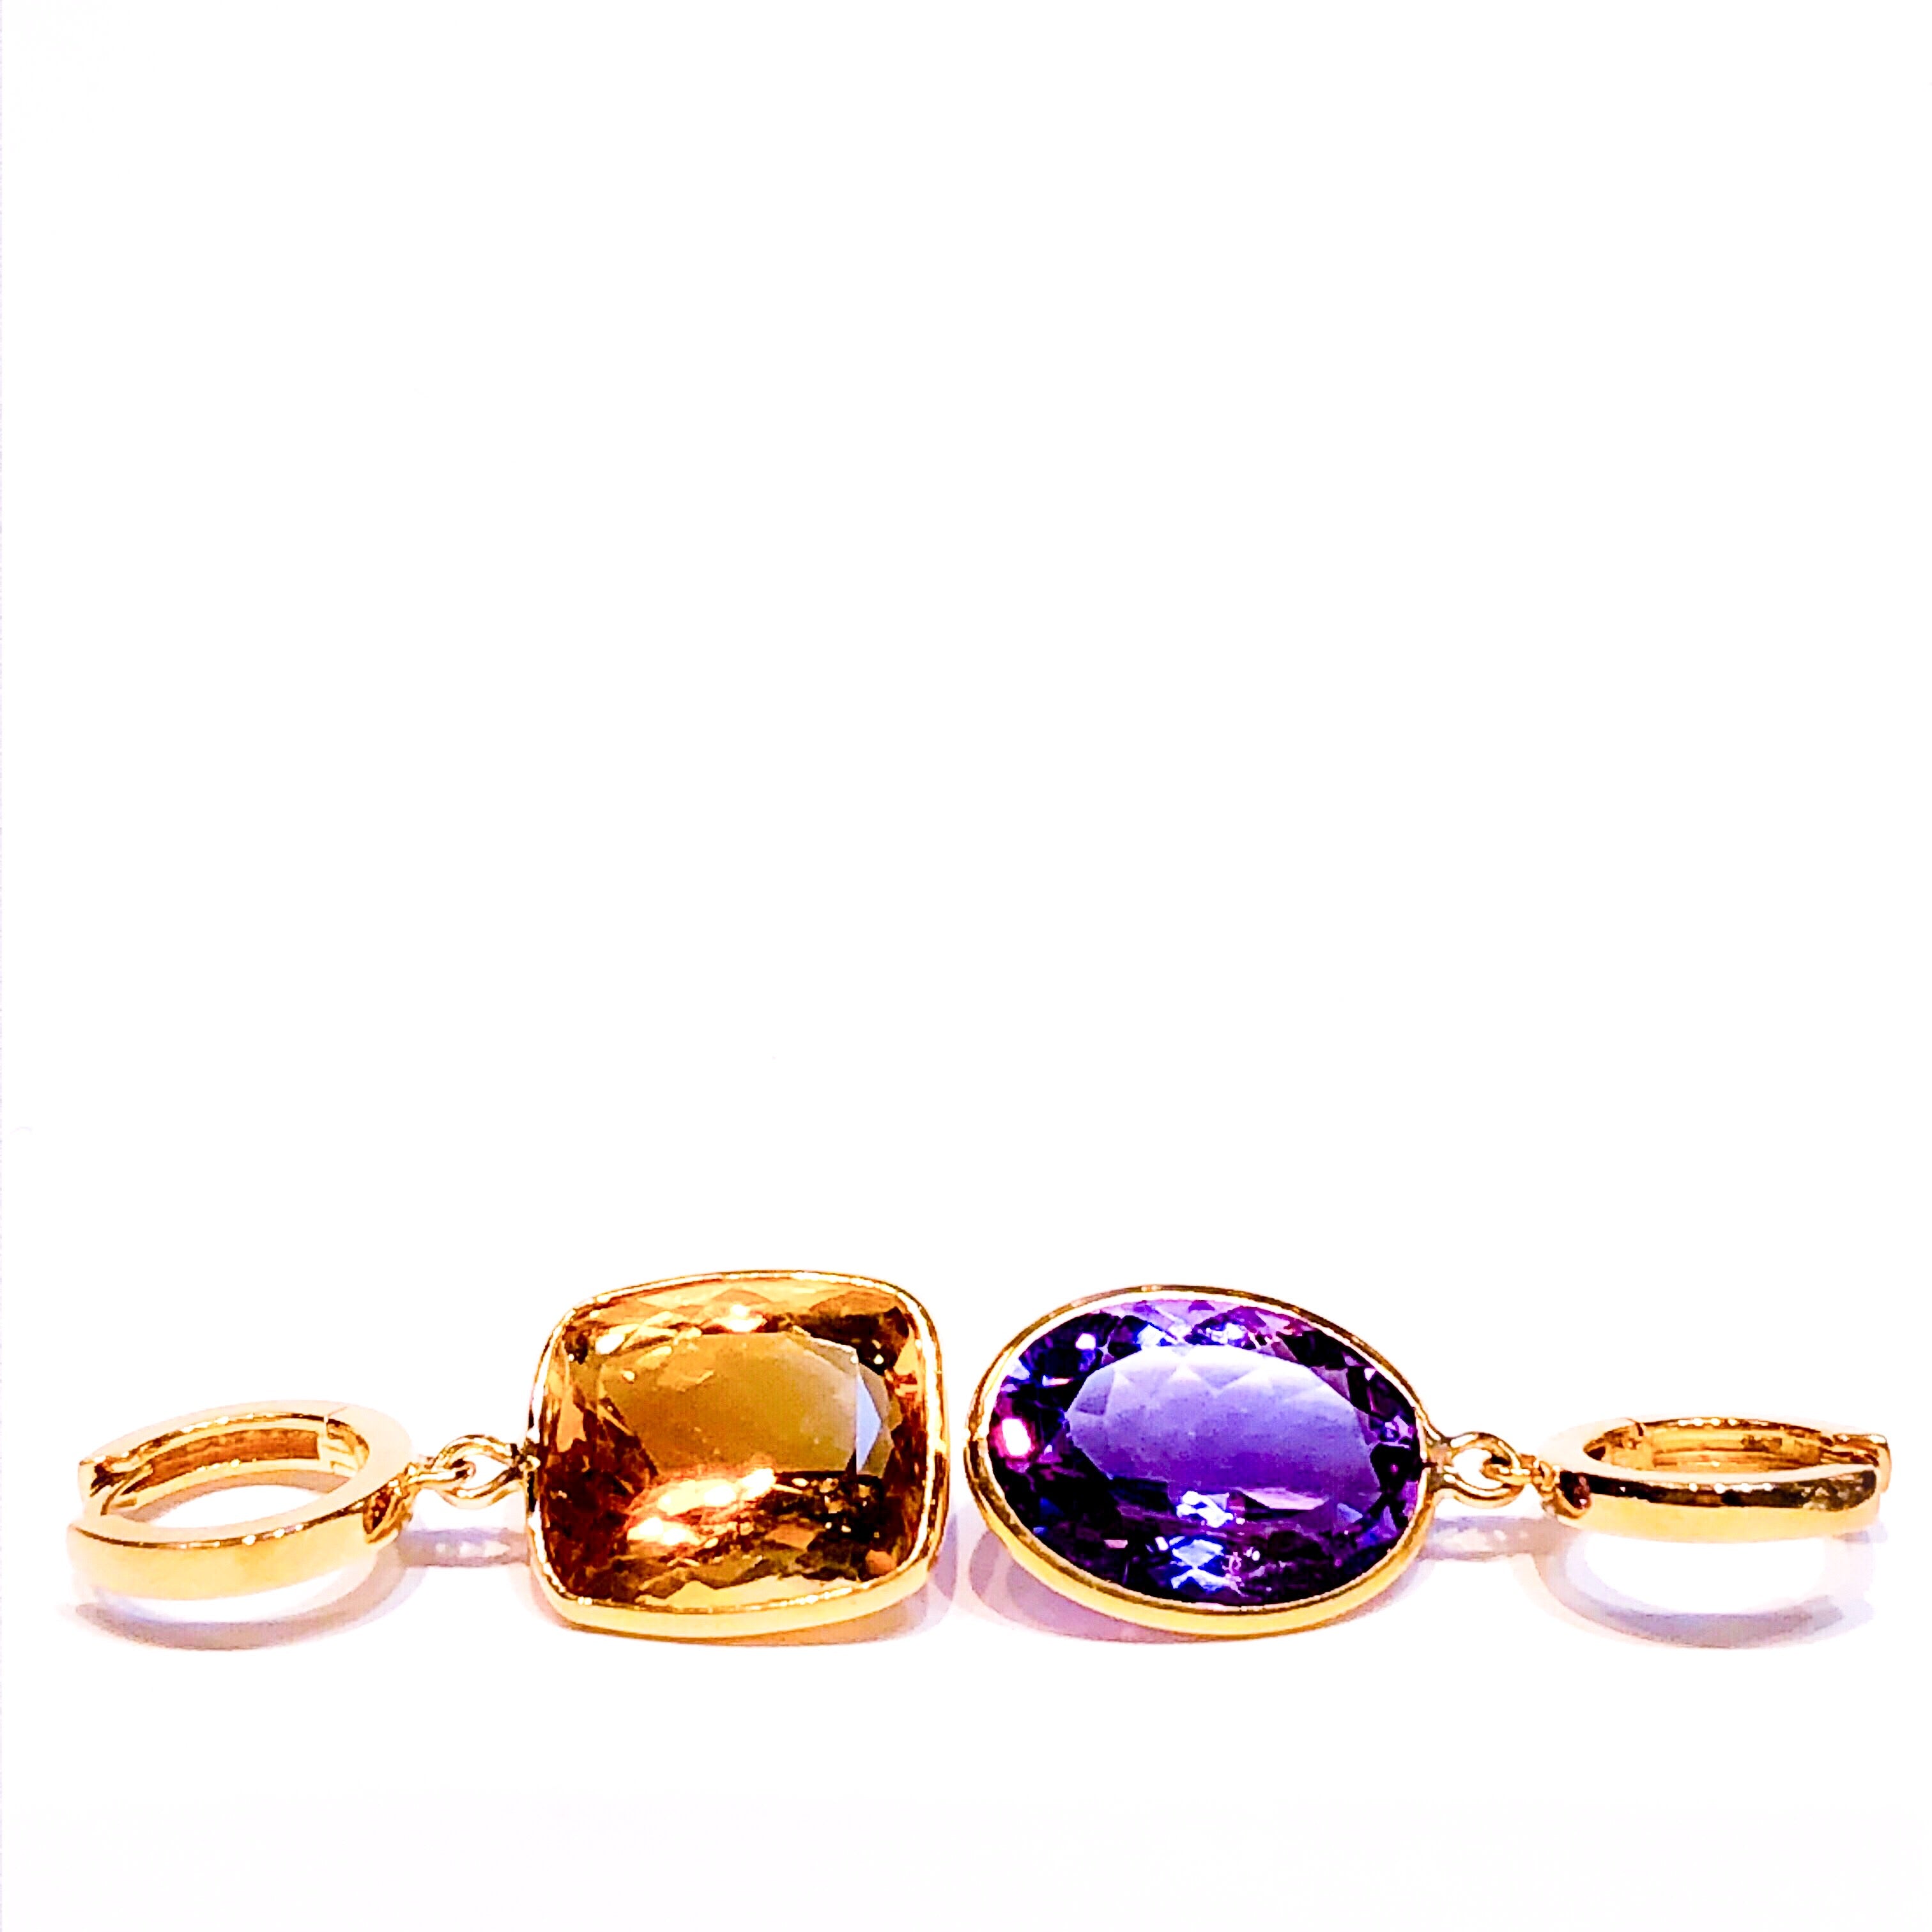 18kt Gold and Amethyst Drop Earrings